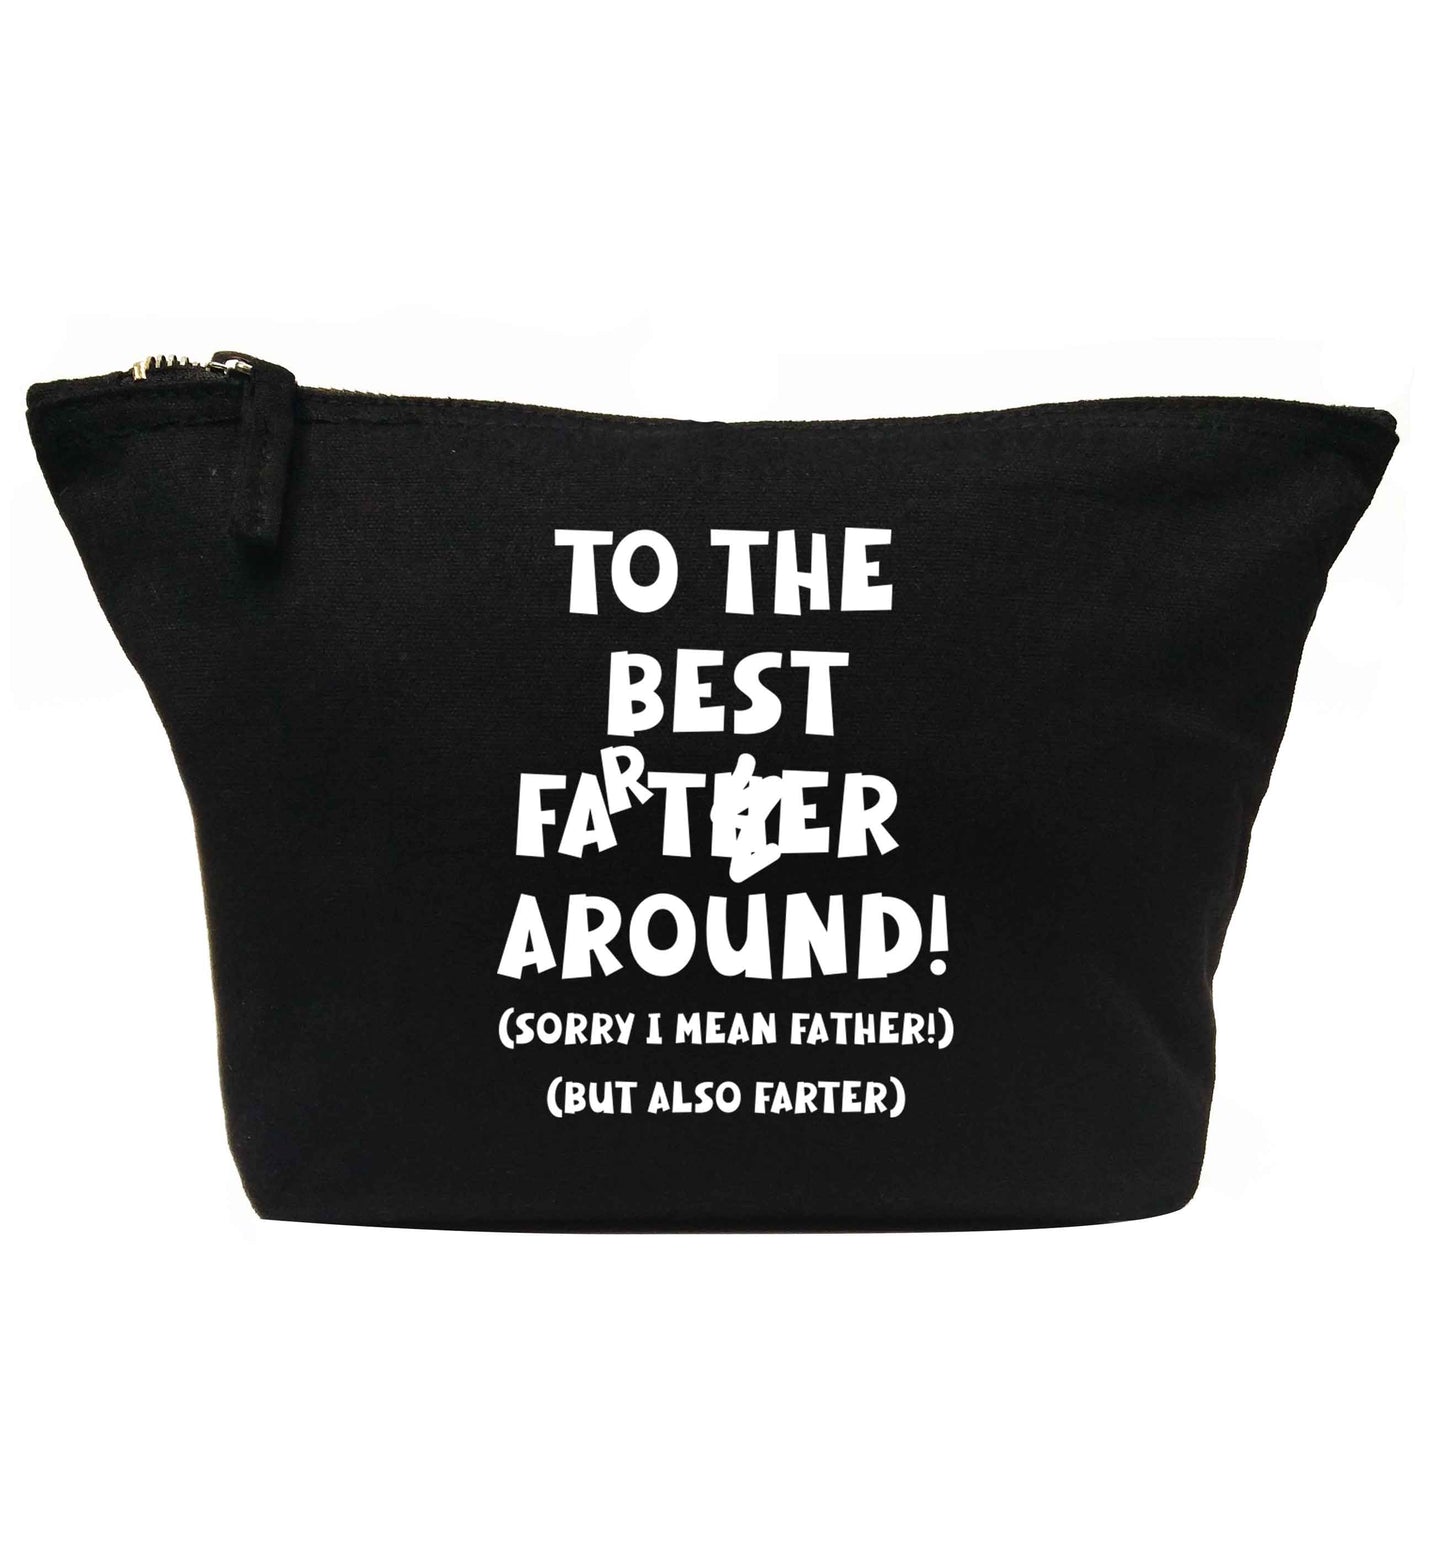 To the best farter around! Sorry I mean father, but also farter | Makeup / wash bag